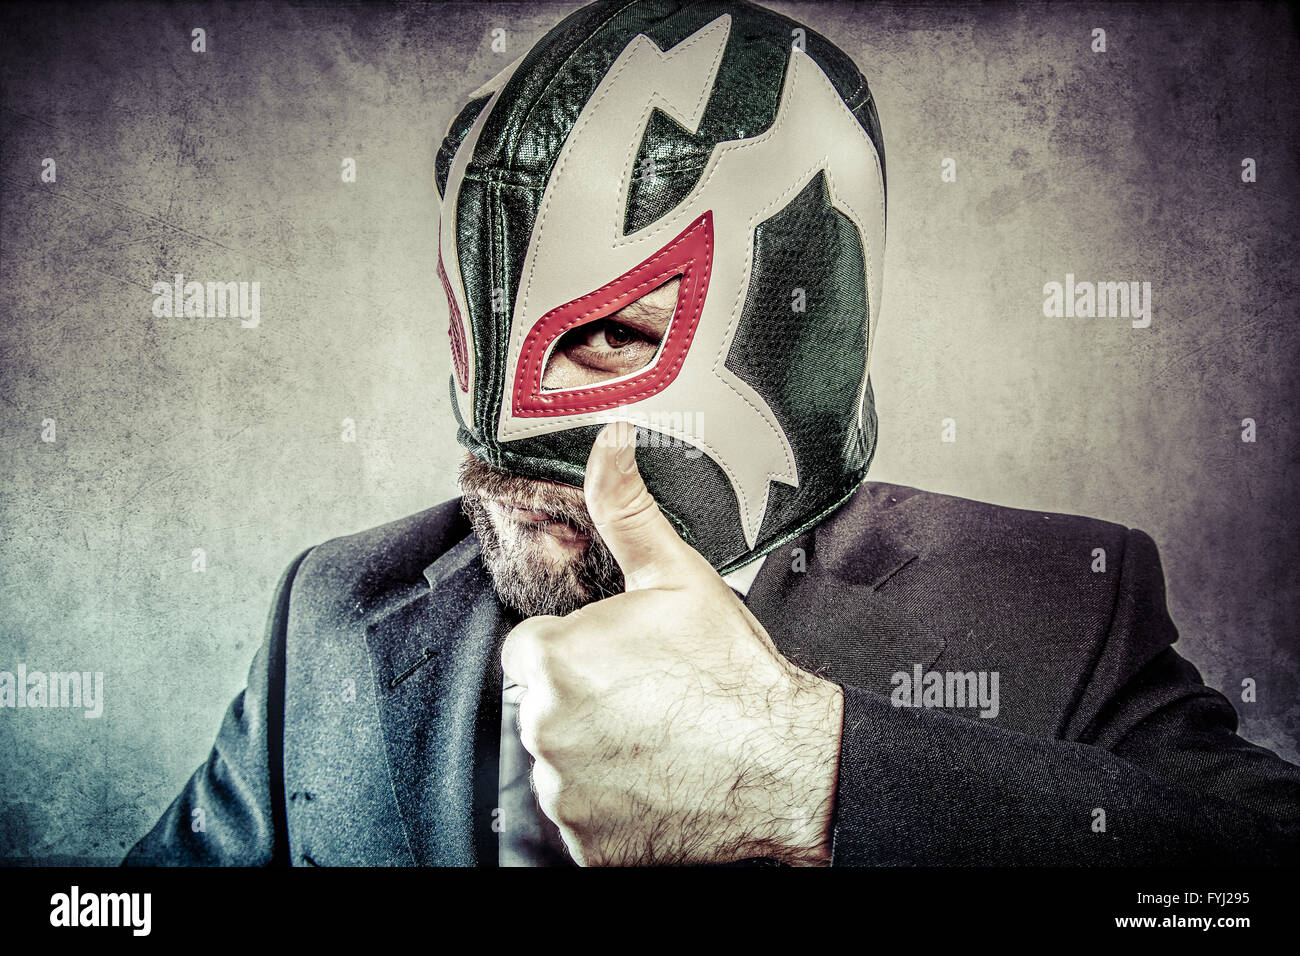 all it is ok, aggressive executive suit and tie, Mexican wrestler mask Stock Photo